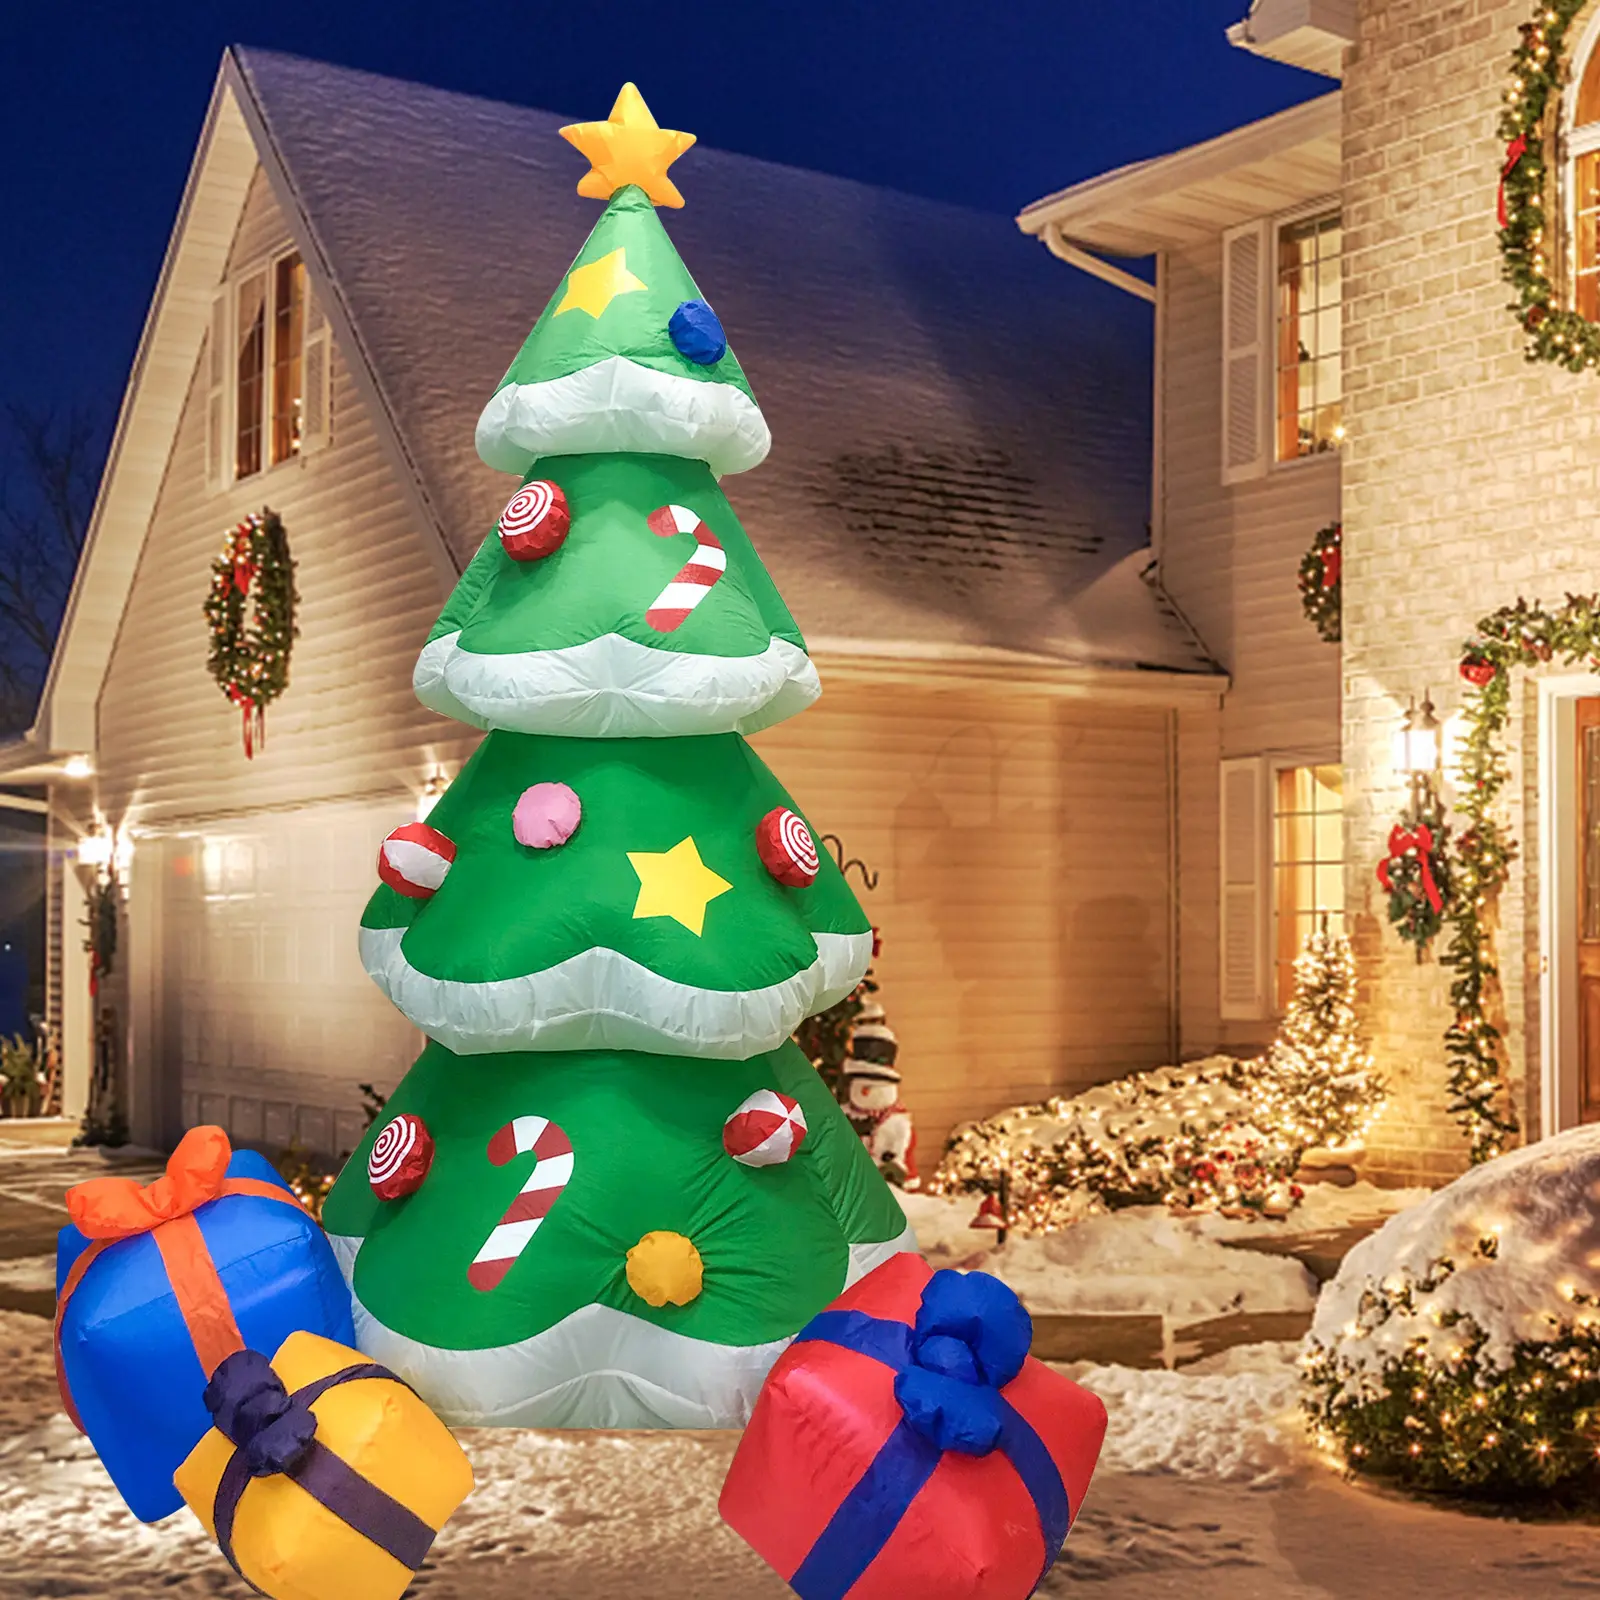 Outdoor Inflatable Christmas Tree 7ft Large Size Christmas Tree LED Lighting Blow Up Inflatable Christmas Tree Decoration